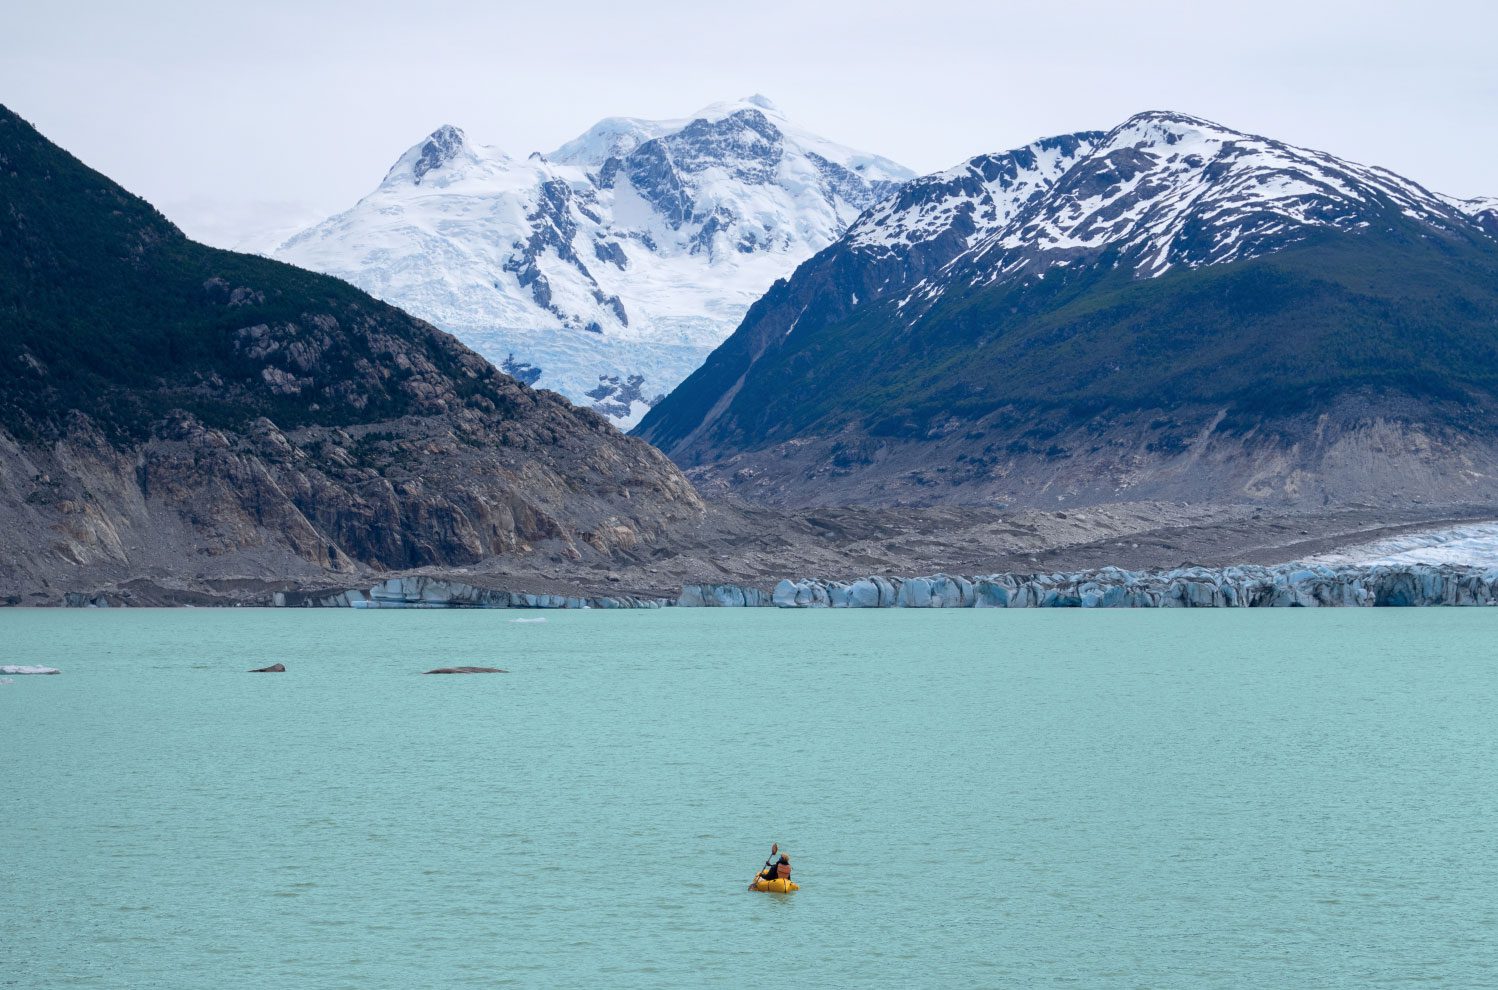 A kayaker paddles across teal colored arctic water in front of a snow covered mountain.